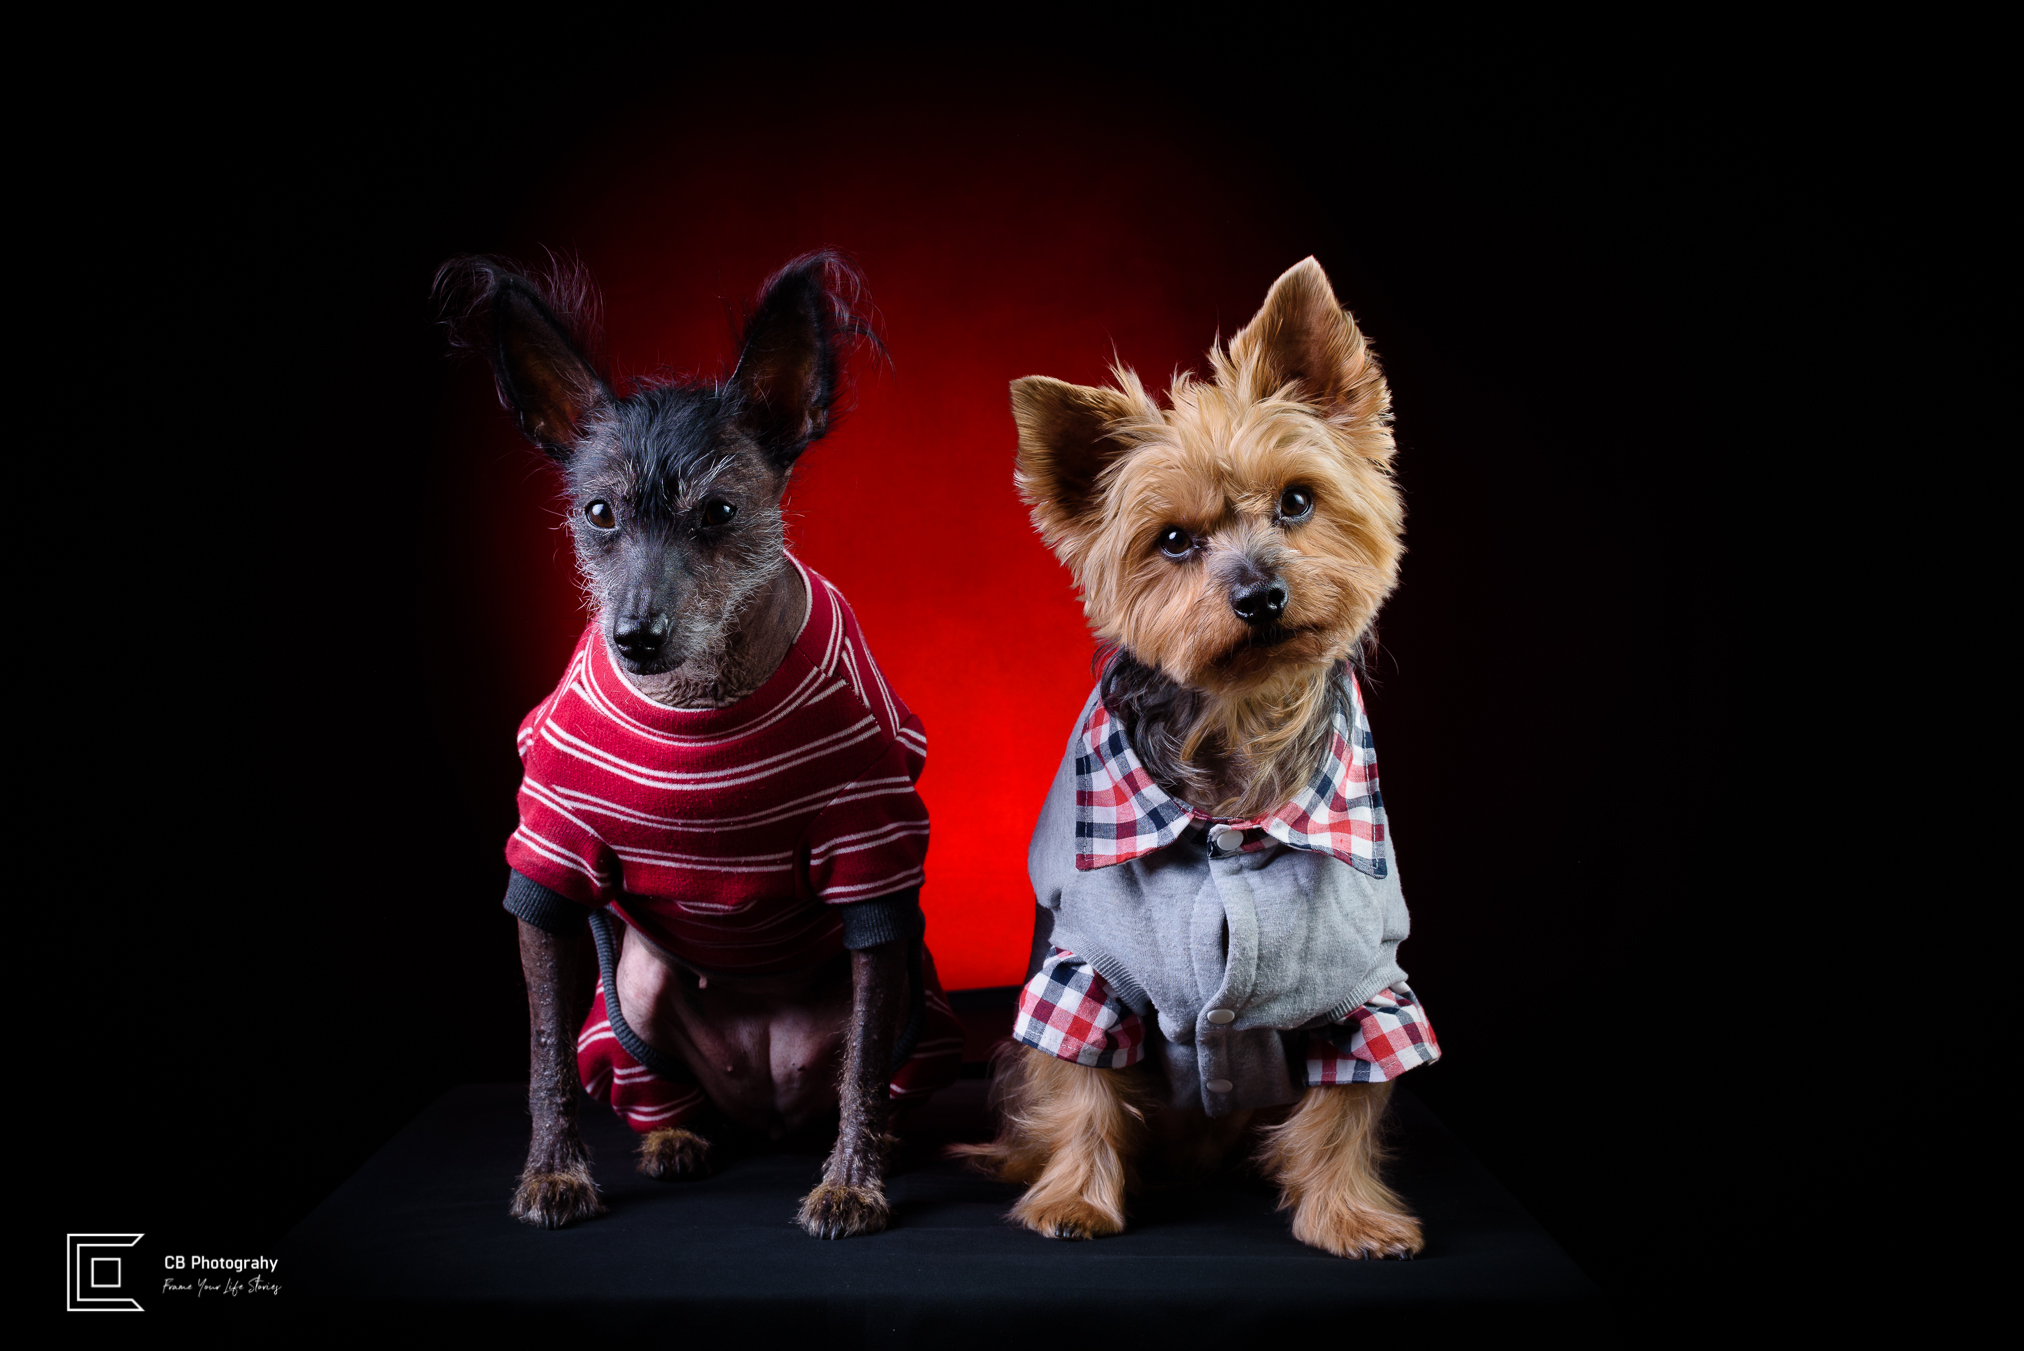 Pet photography in studio, female Xoloitzcuintli-know as Mexican Naked Dog and male Yorkshire Terrier, using a red light background, image by Cristian Bucur, photographer in Bonifacio Global City  